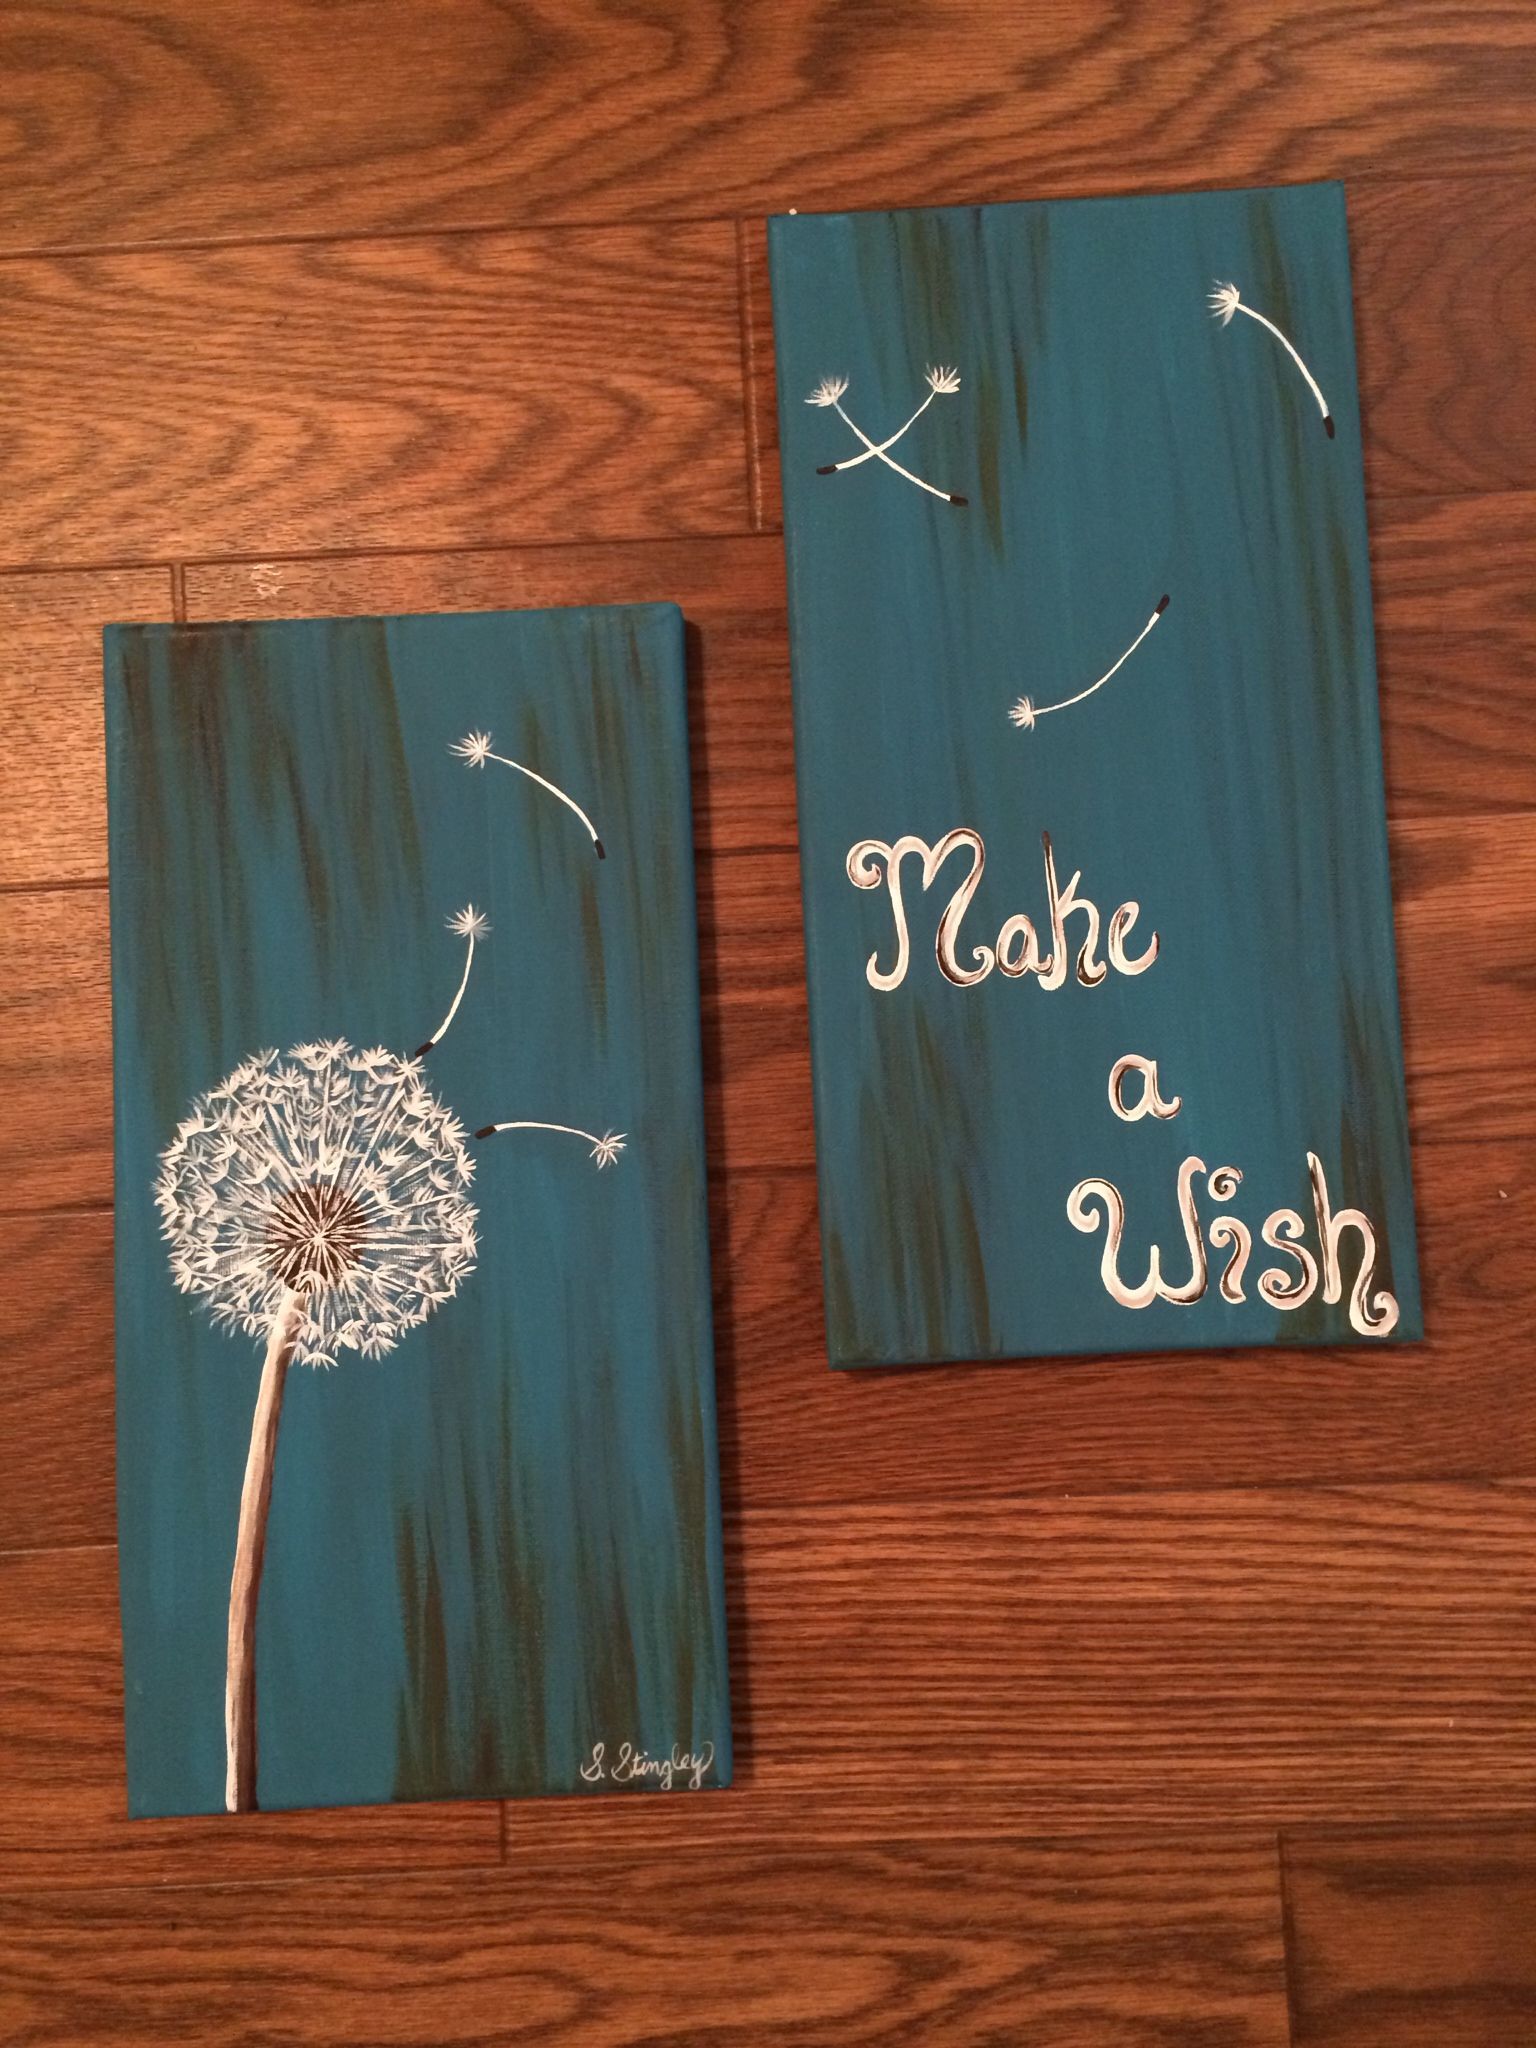 Cute, whimsical, multiple canvas painting by Shelby Stingley